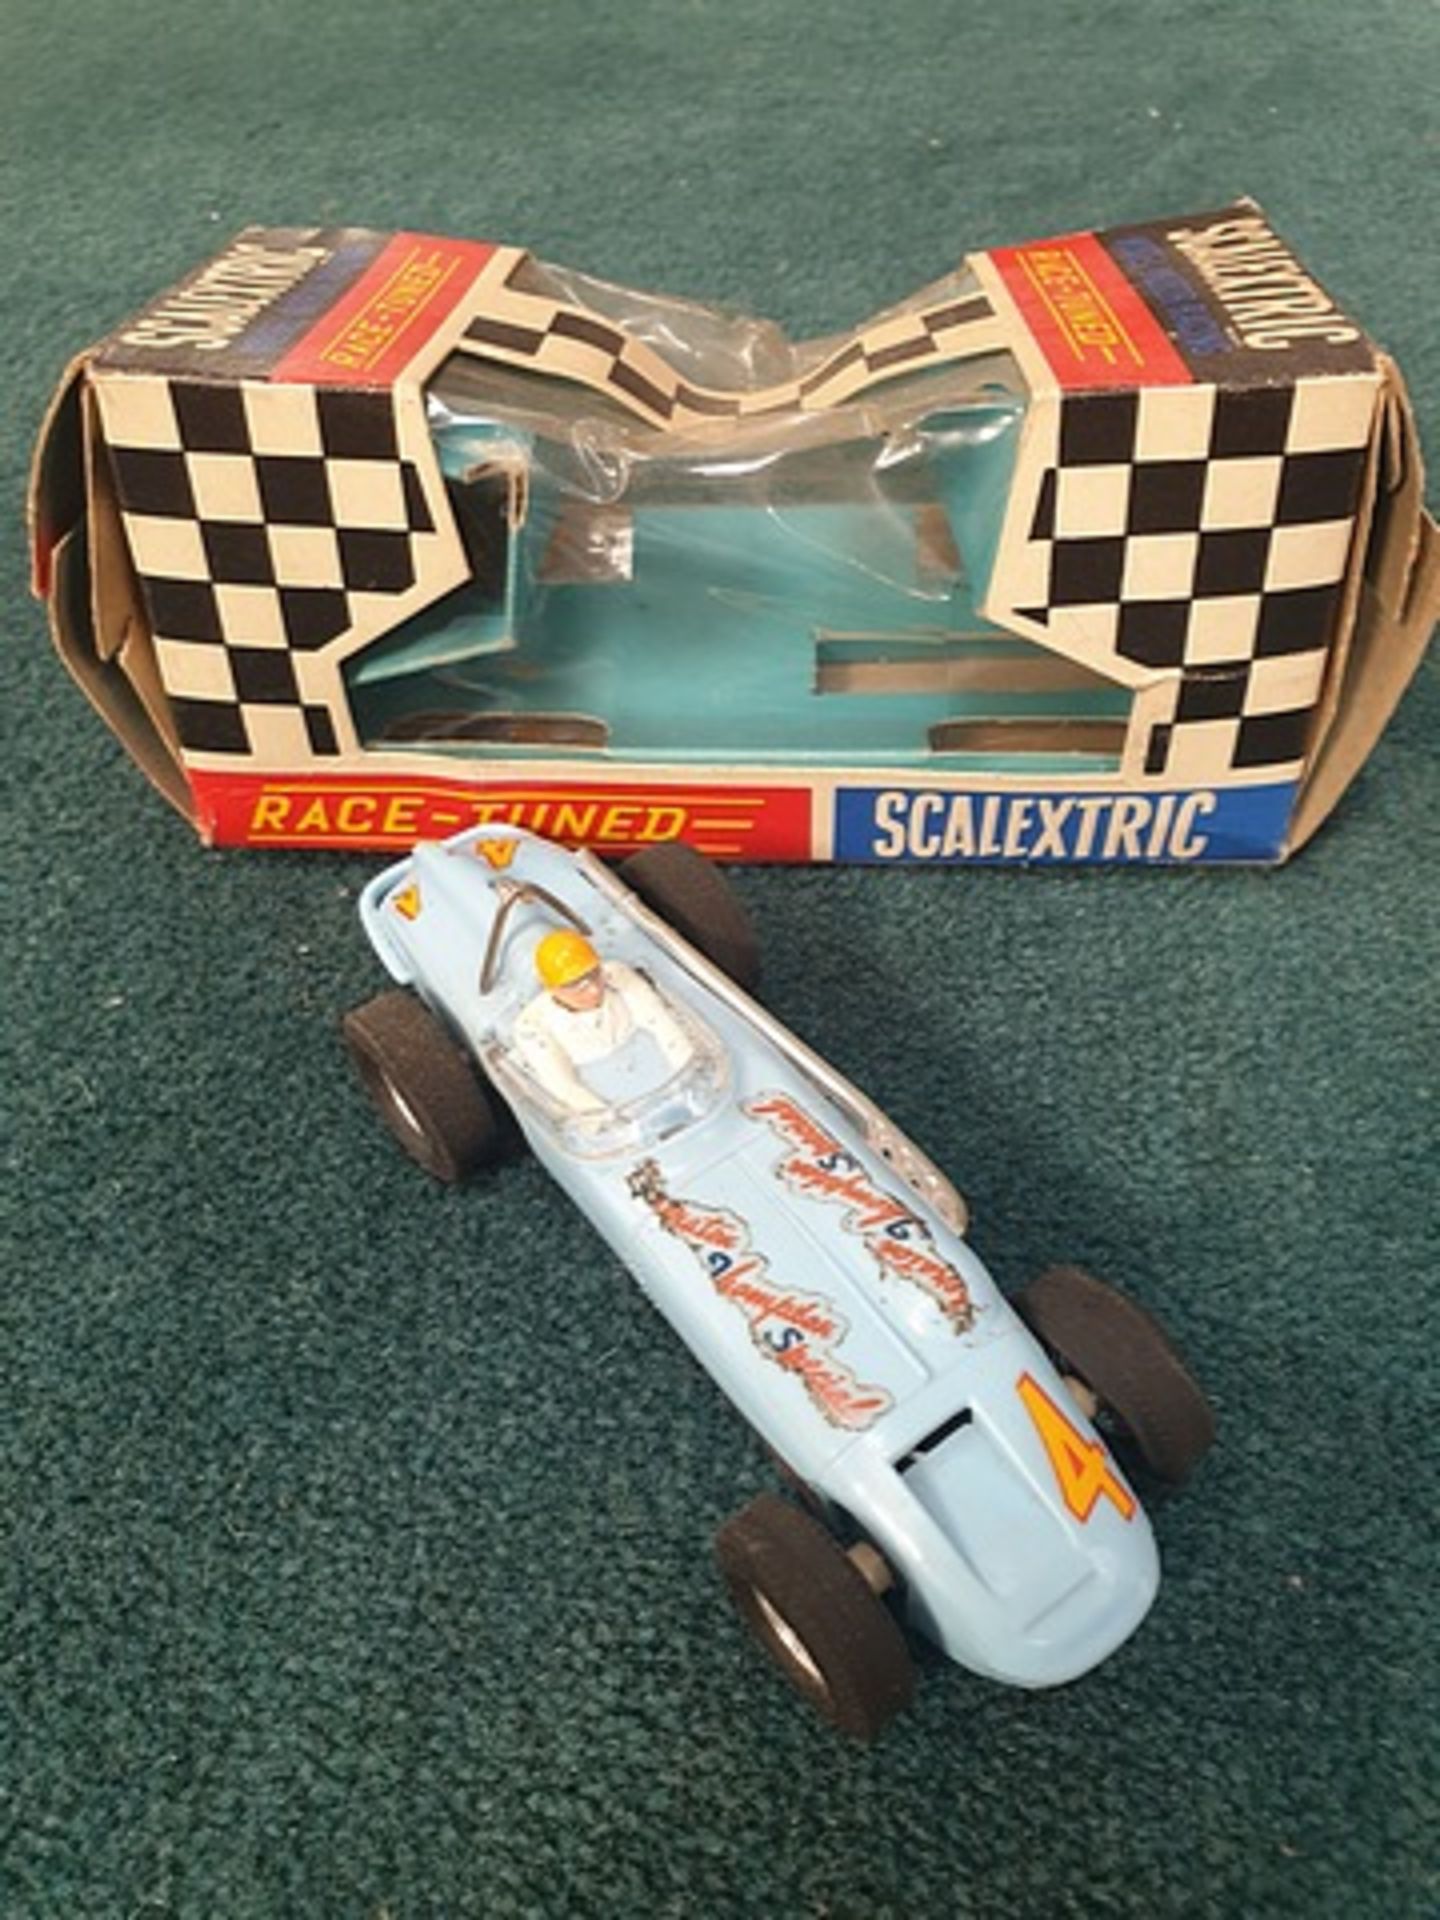 Scalextric Model Racing Slot Car Race Tuned C/79 Offenhauser Front Engine Grand Prix In Pale Blue